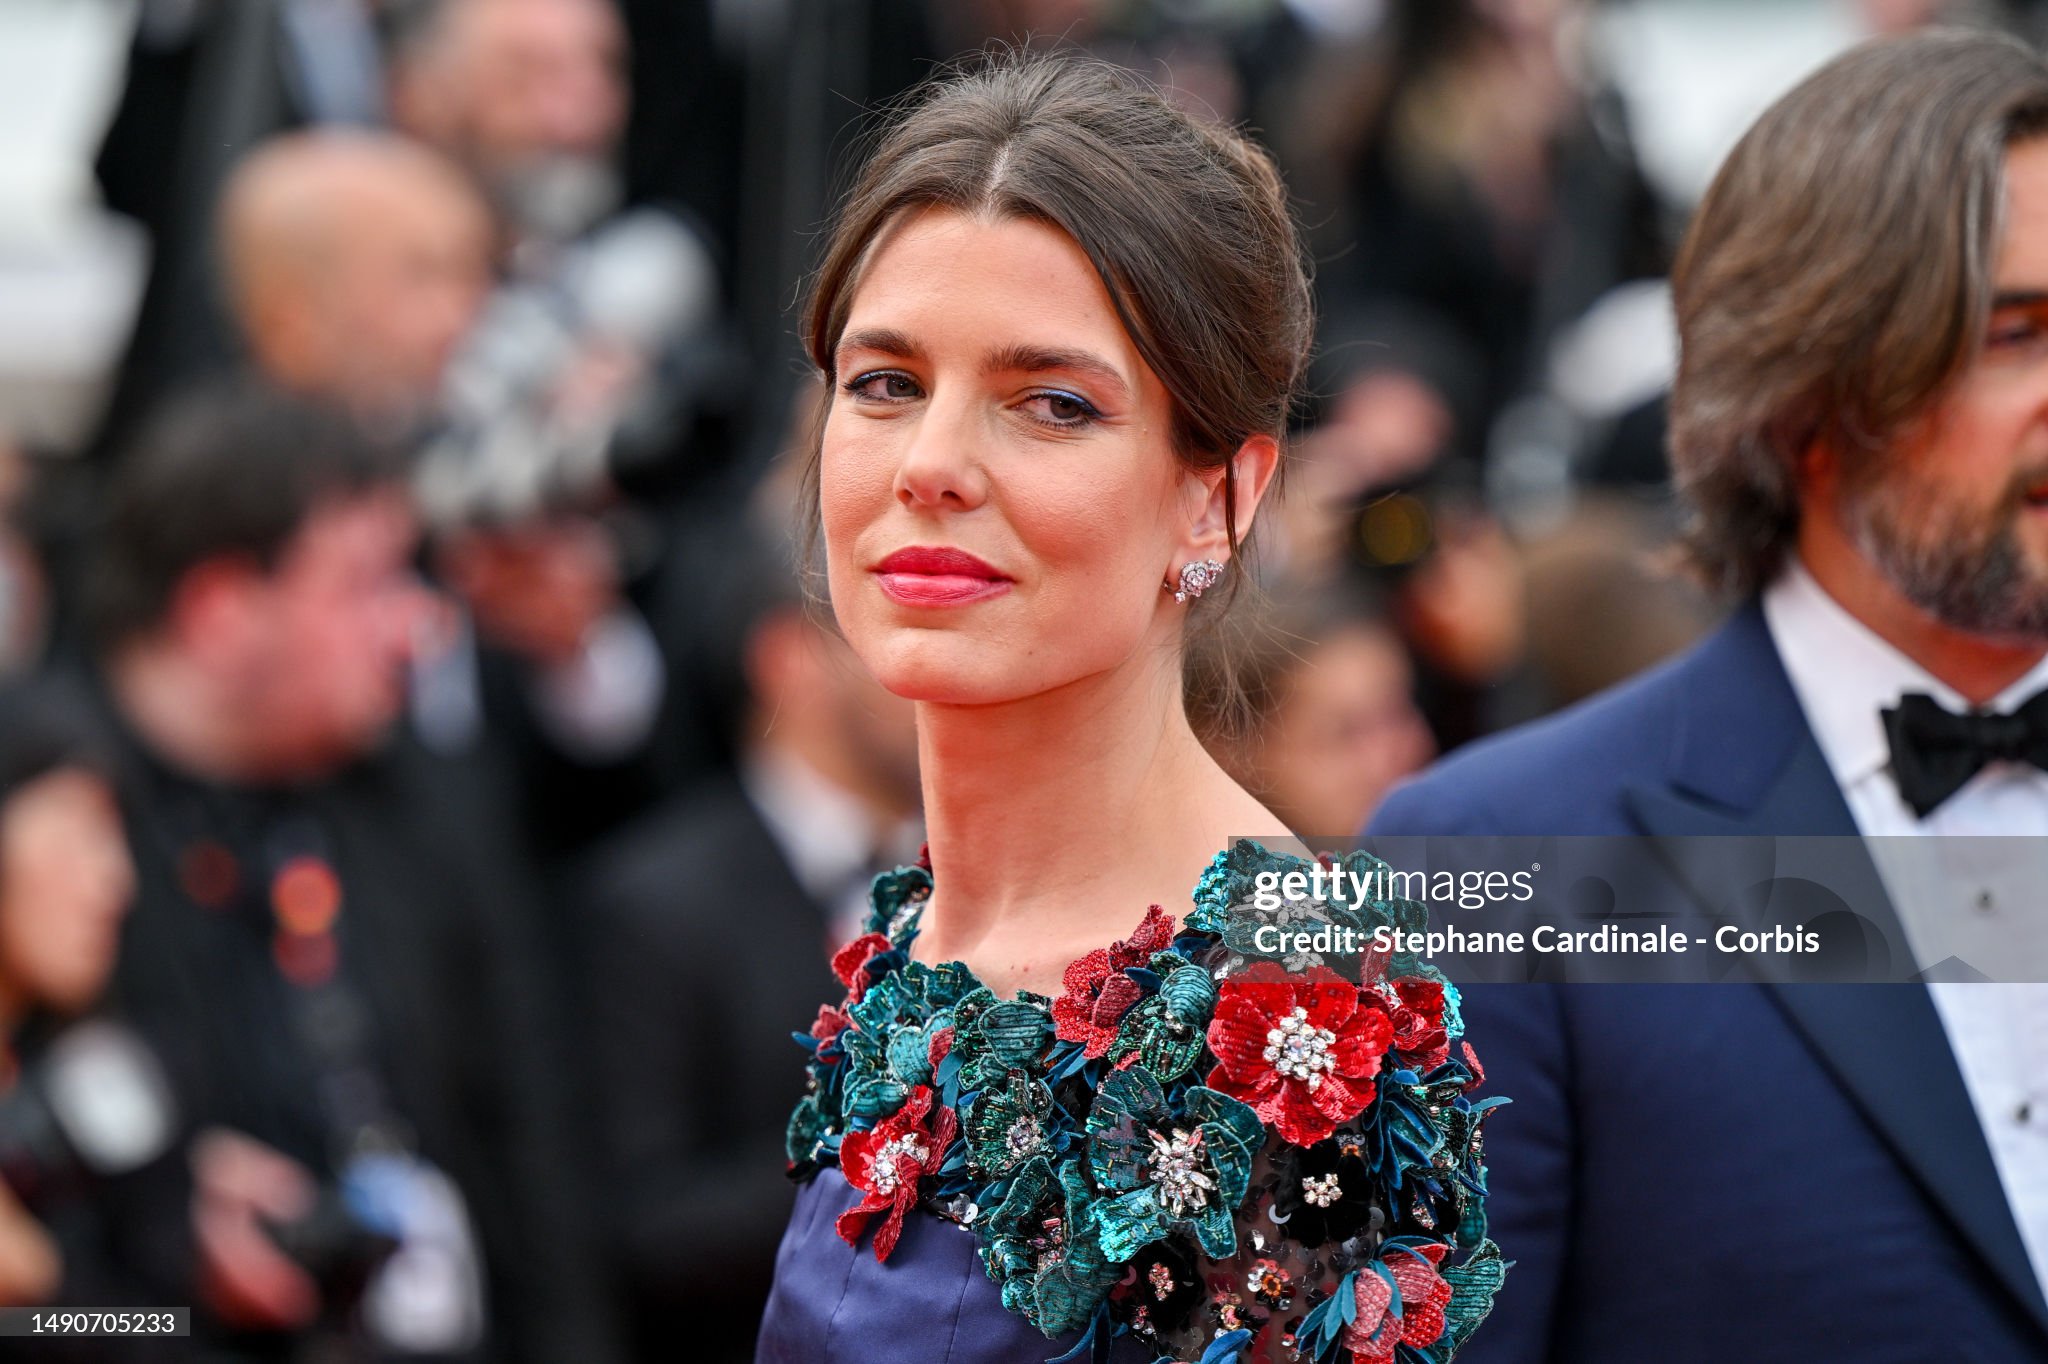 charlotte-casiraghi-attends-the-jeanne-du-barry-screening-opening-ceremony-red-carpet-at-the.jpg